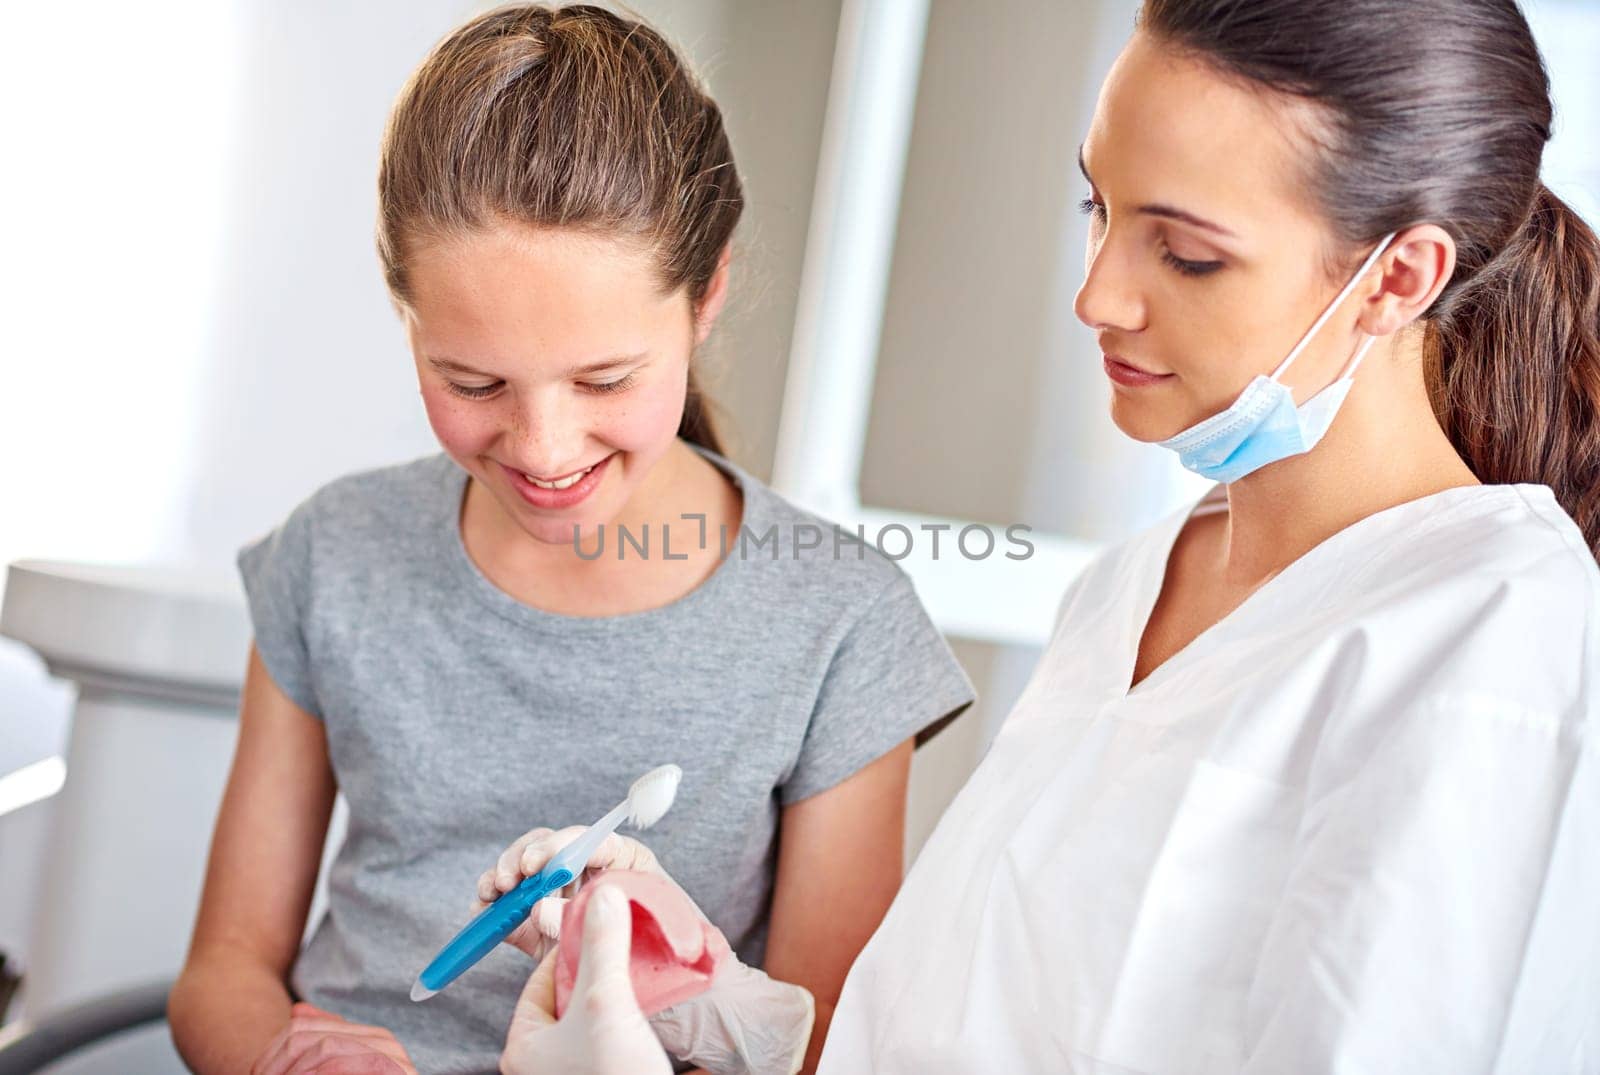 Dentist, child and oral hygiene with dentures for teaching on dental care, cleaning and consultation. Advice, girl and orthodontist holding toothbrush for gum disease, treatment and healthy teeth.